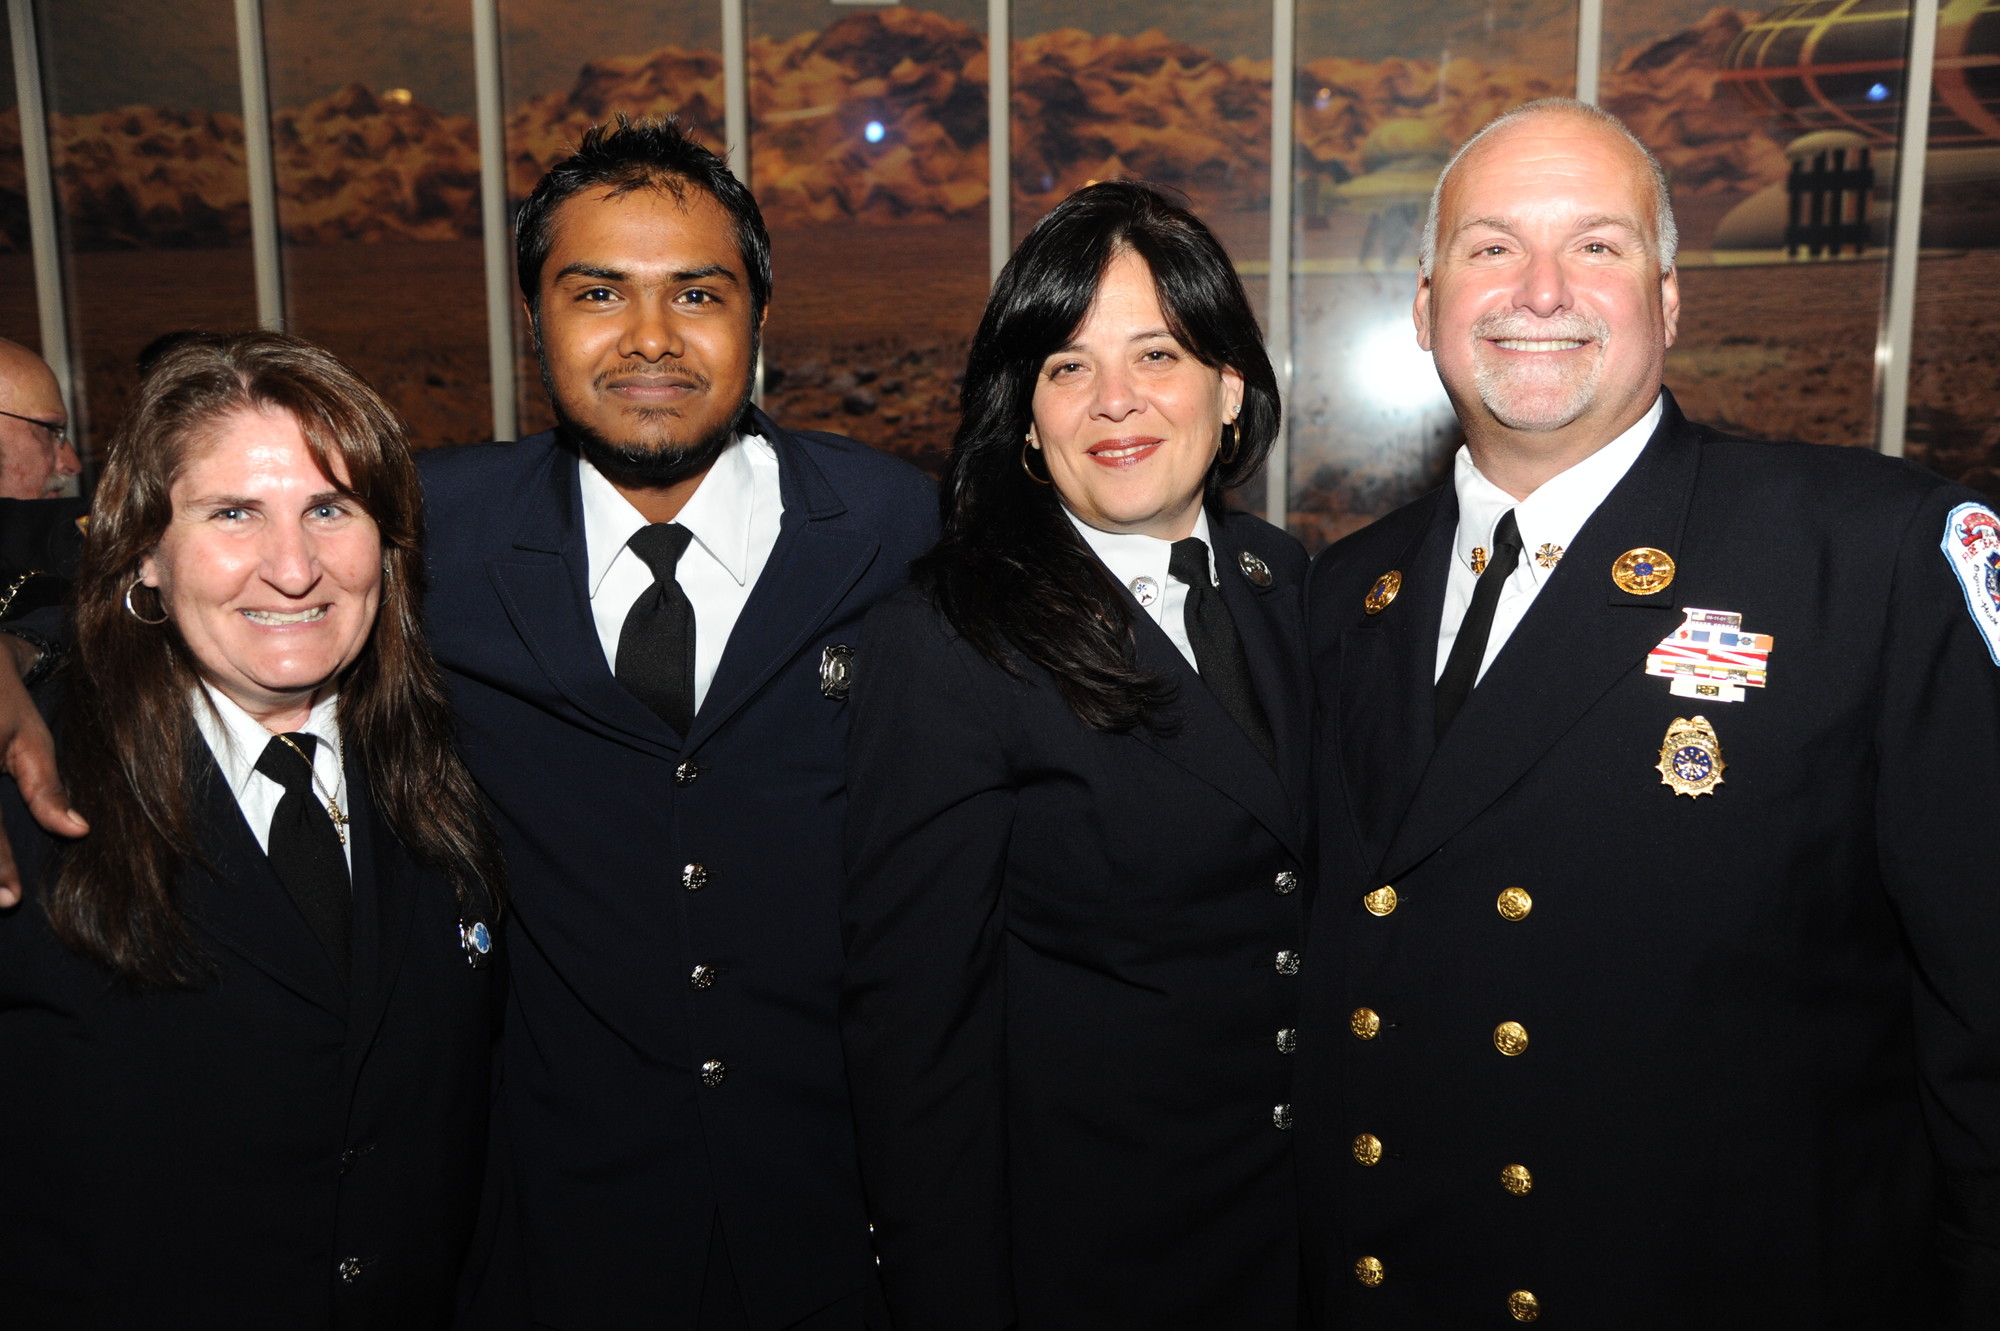 Members of the Island Park Fire Department celebrated the evening with their chief. From left, Susan Peterson, Shiv Hardewar, Margaret Rodriguez and Steve Ruscio.